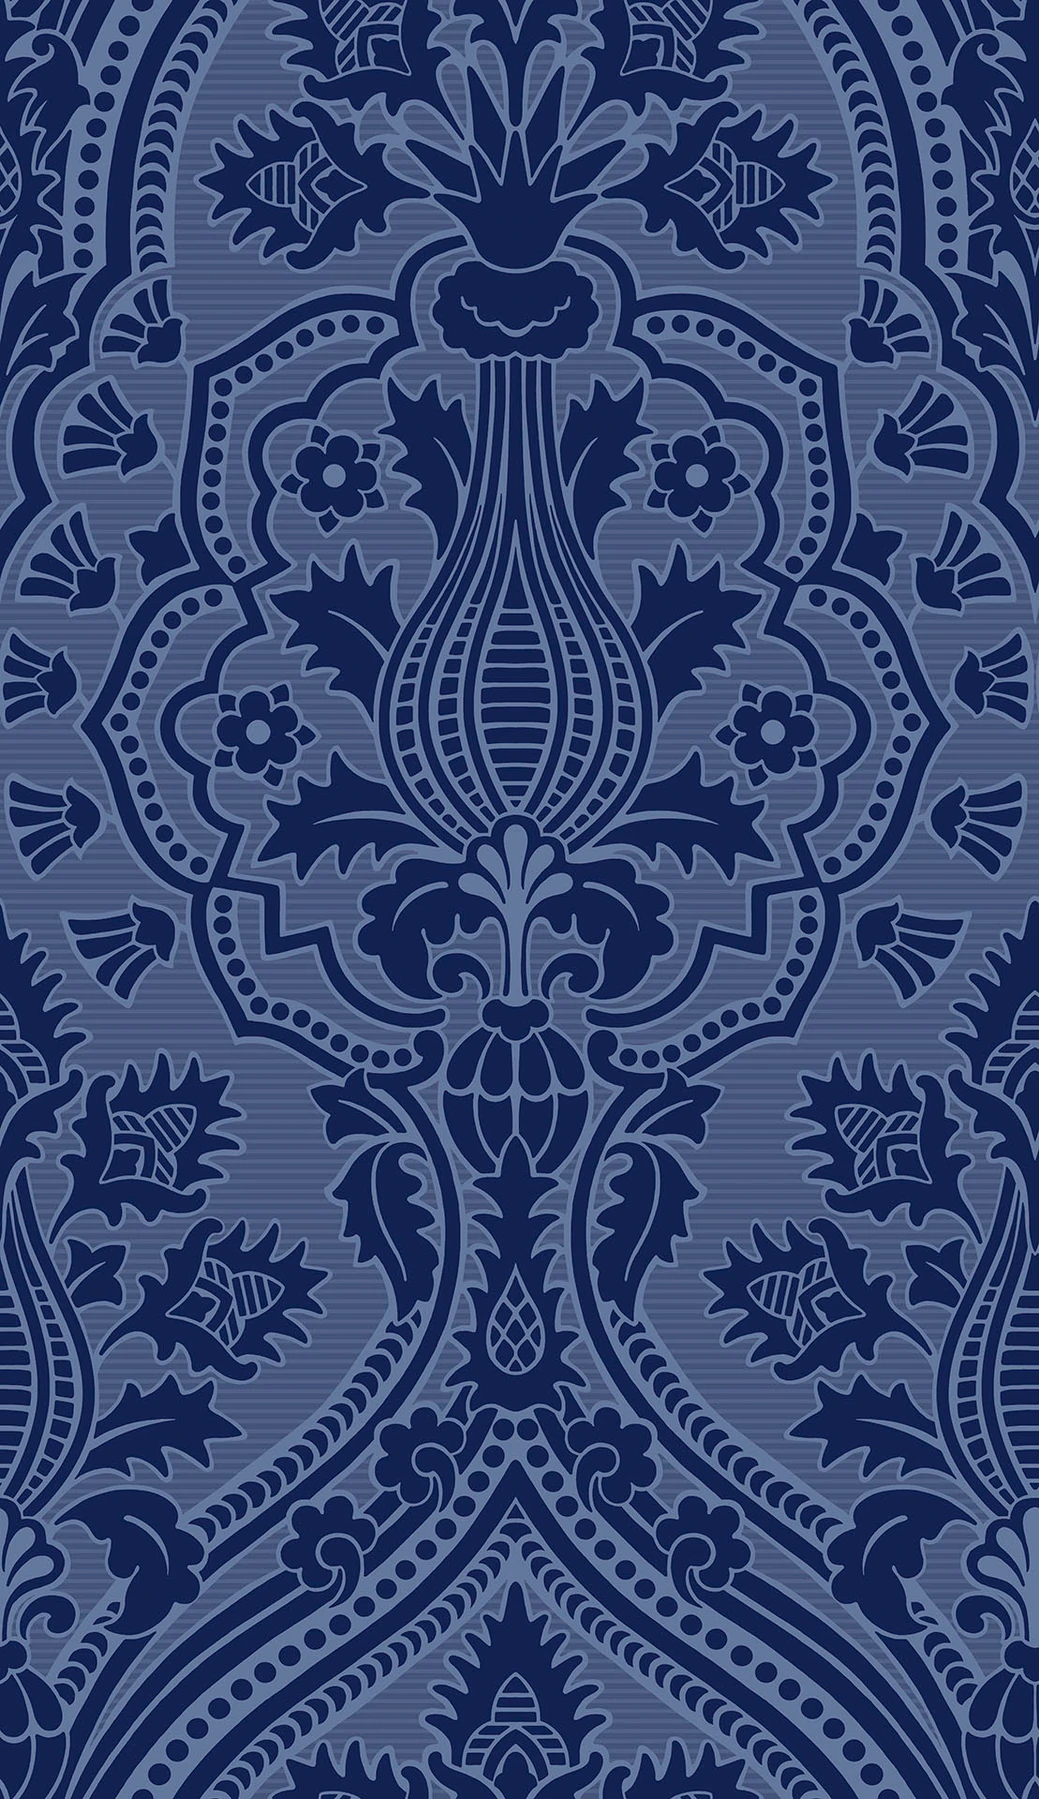 Pugin Palace Flock Tapete - 116/9033 - Cole&Son - The Pearwood Collection